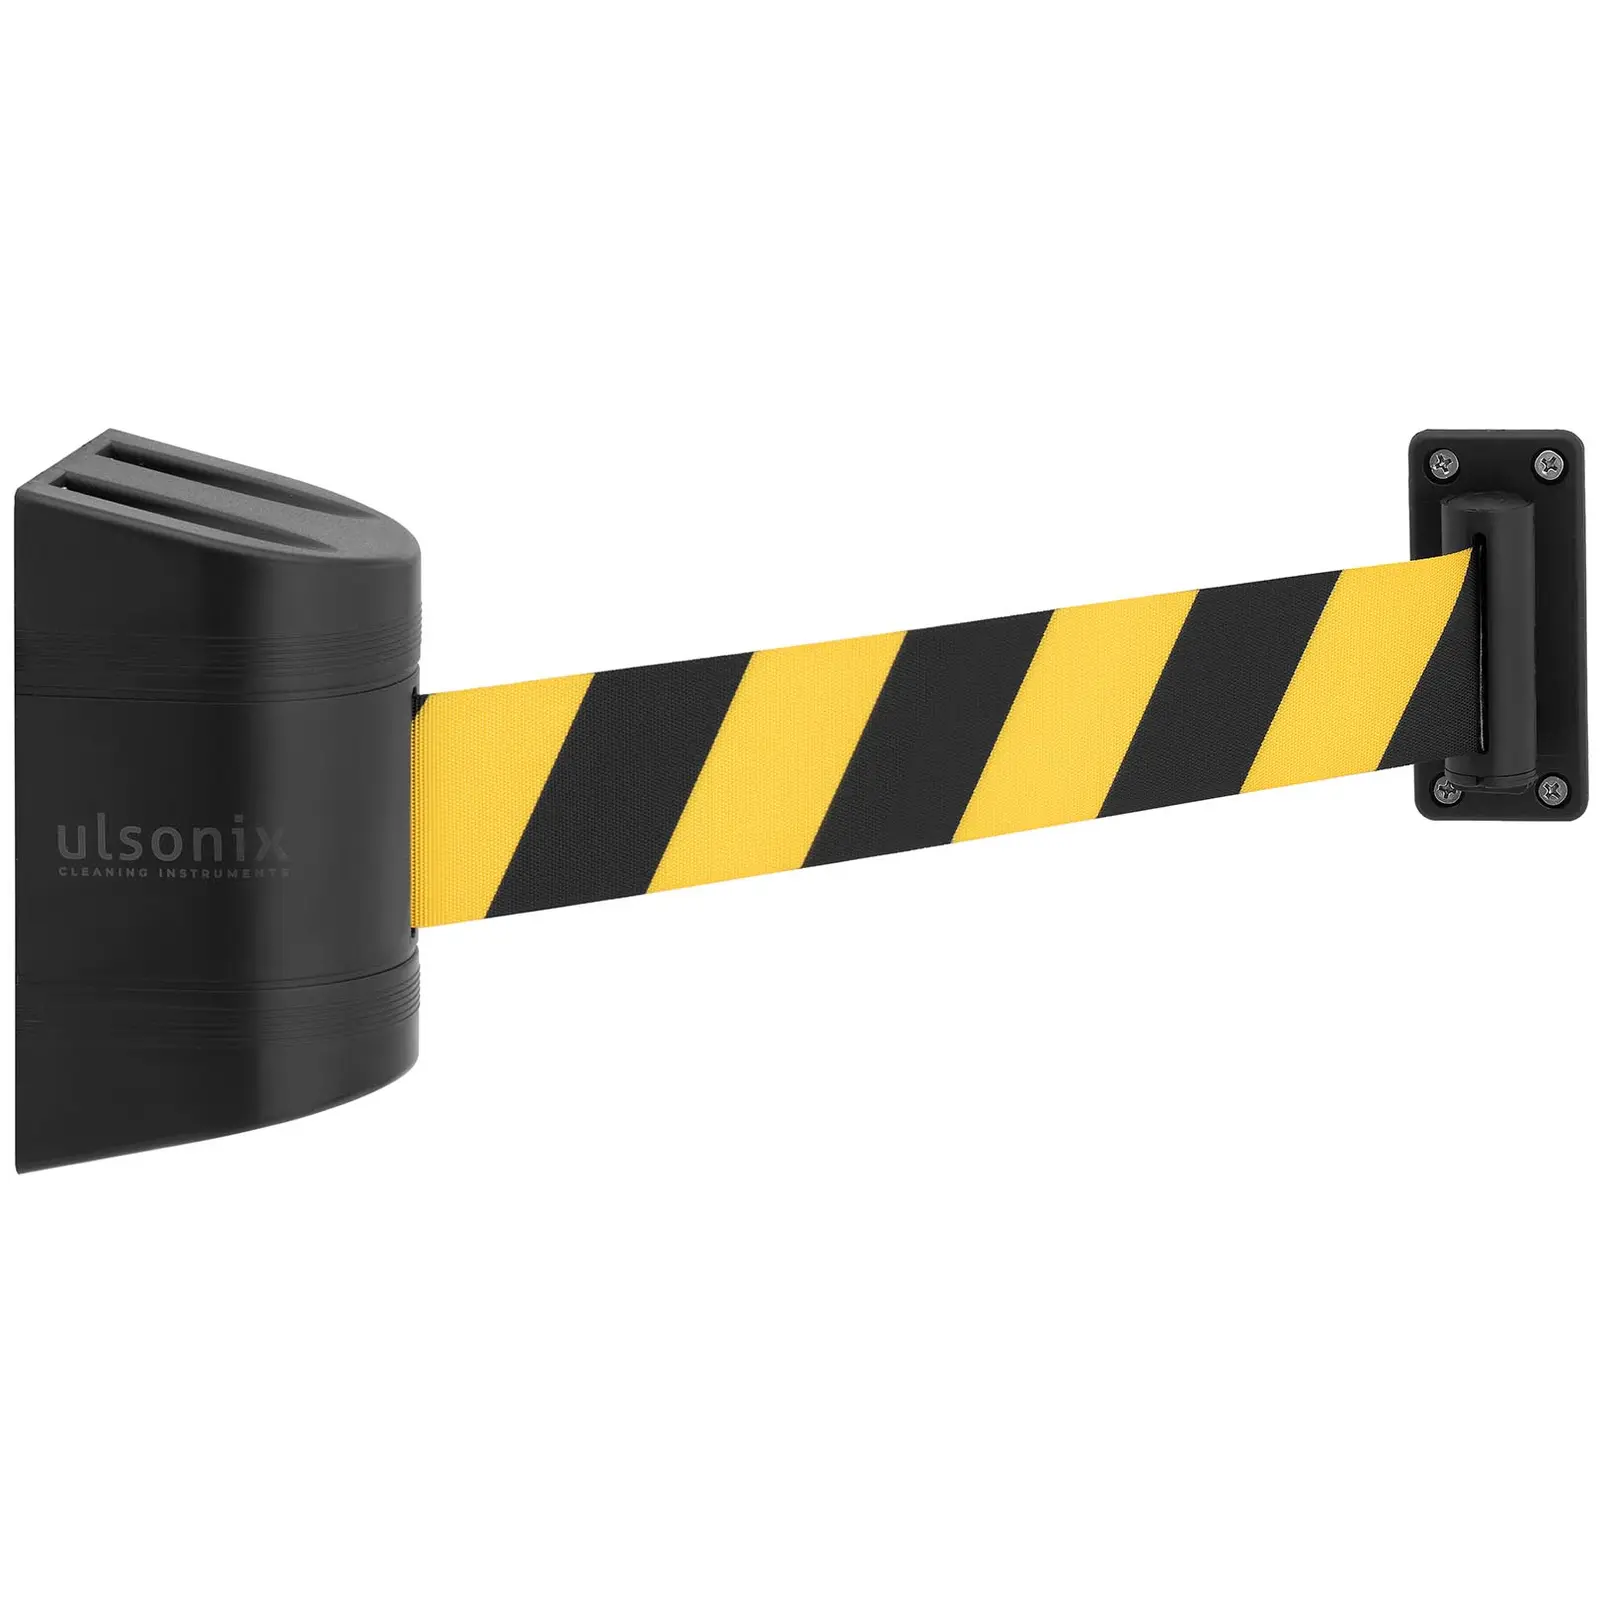 Wall Mounted Retractable Barrier - made of plastic- yellow/black - 2 m